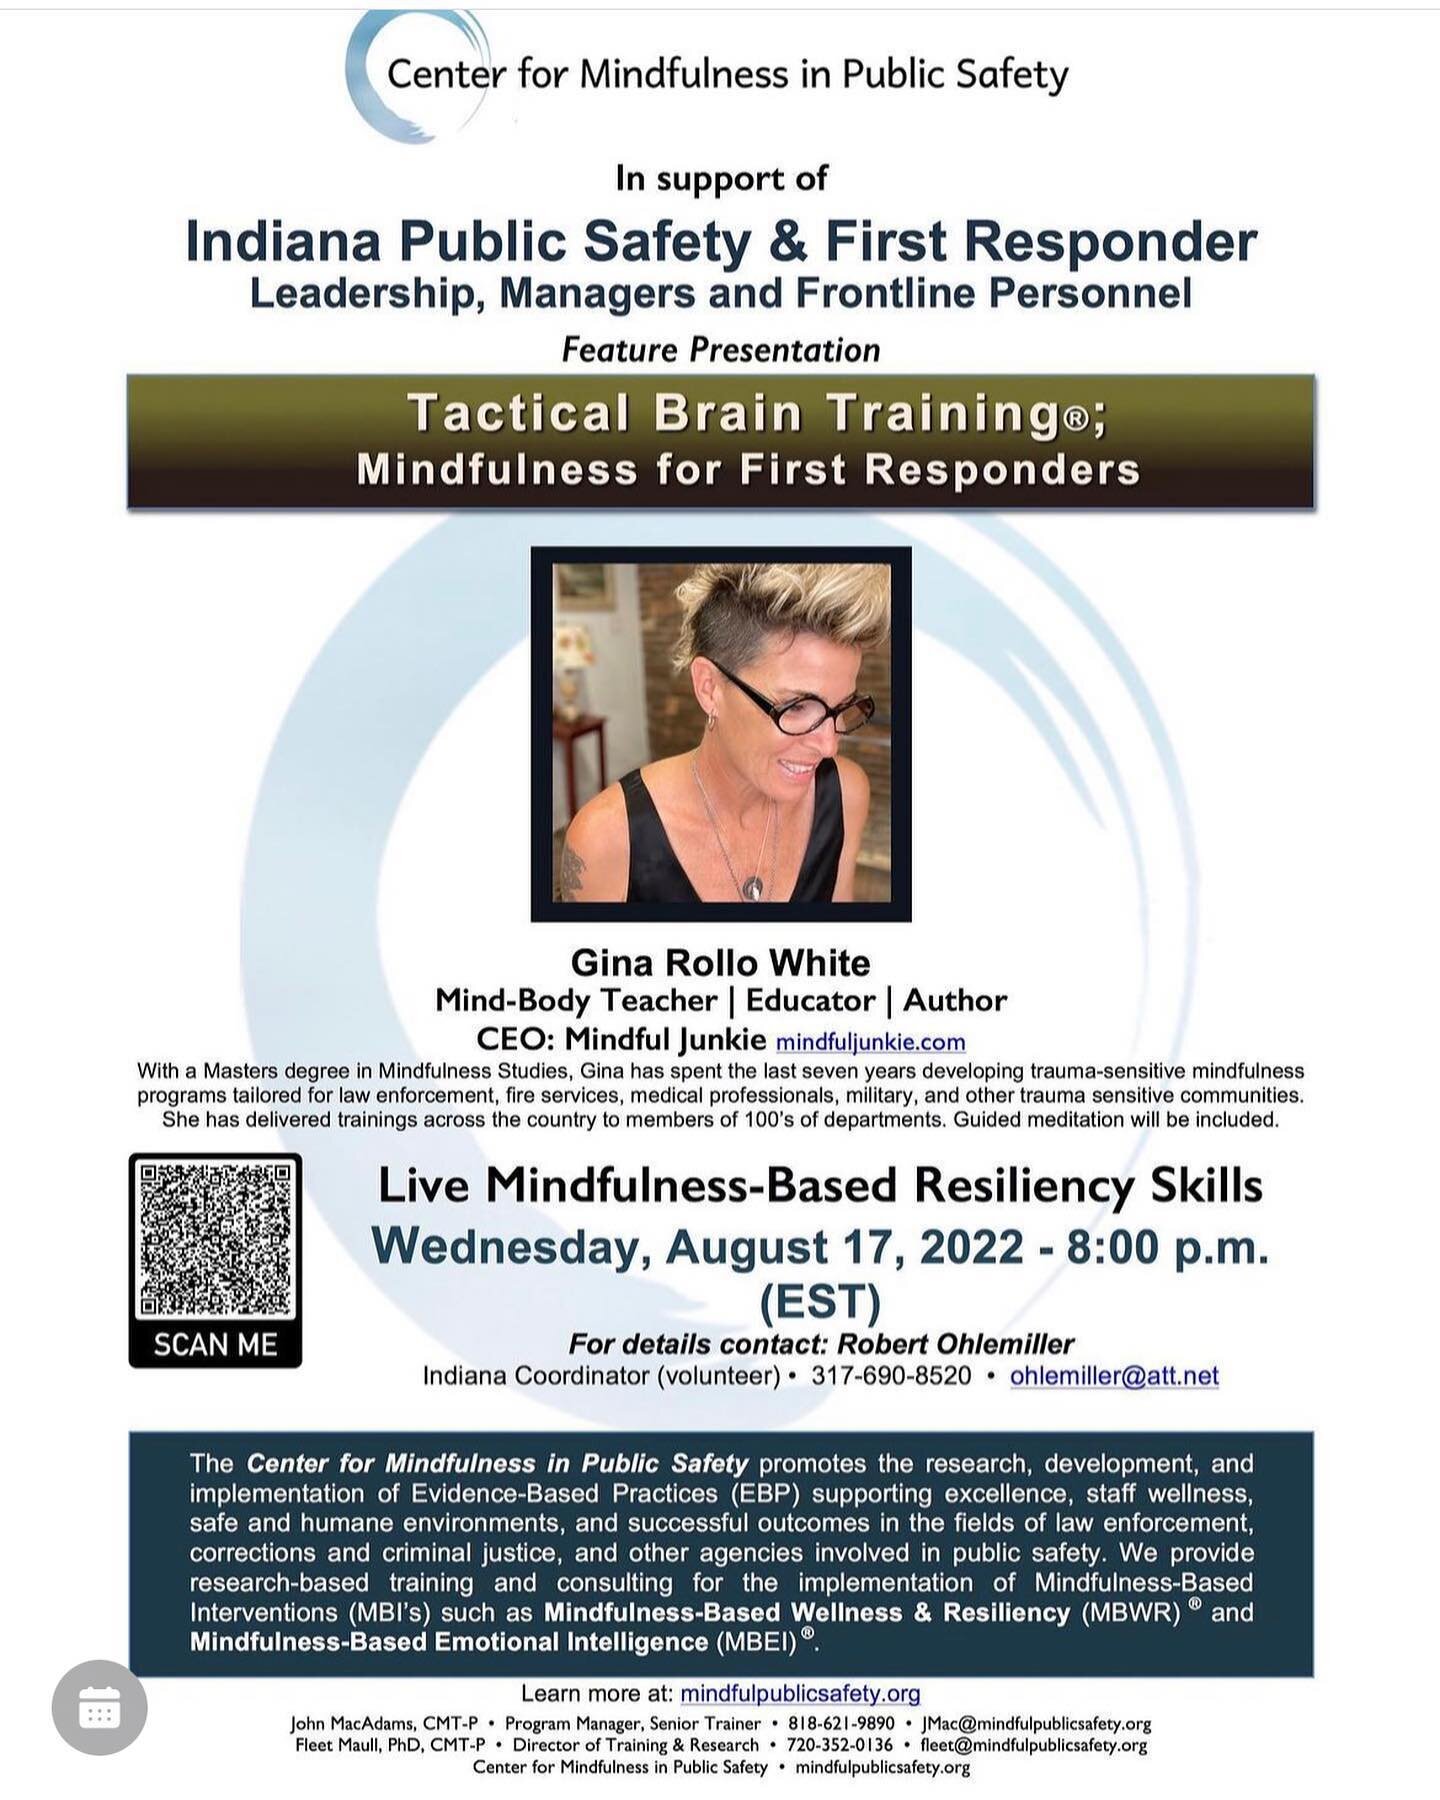 Excited for tomorrow. 🧘🏻&zwj;♂️ Thanks for hosting me @isphealthandwellness &amp; Center For Mindfulness In Public Safety! 

🧘🏻&zwj;♂️🧑🏿&zwj;🚒👮&zwj;♀️🧘🏻&zwj;♀️🧑🏻&zwj;🚒👮&zwj;♀️🧘🏻&zwj;♂️🧑🏻&zwj;🚒👮🏽&zwj;♀️🧑🏿&zwj;🚒🧘🏻&zwj;♂️

#min